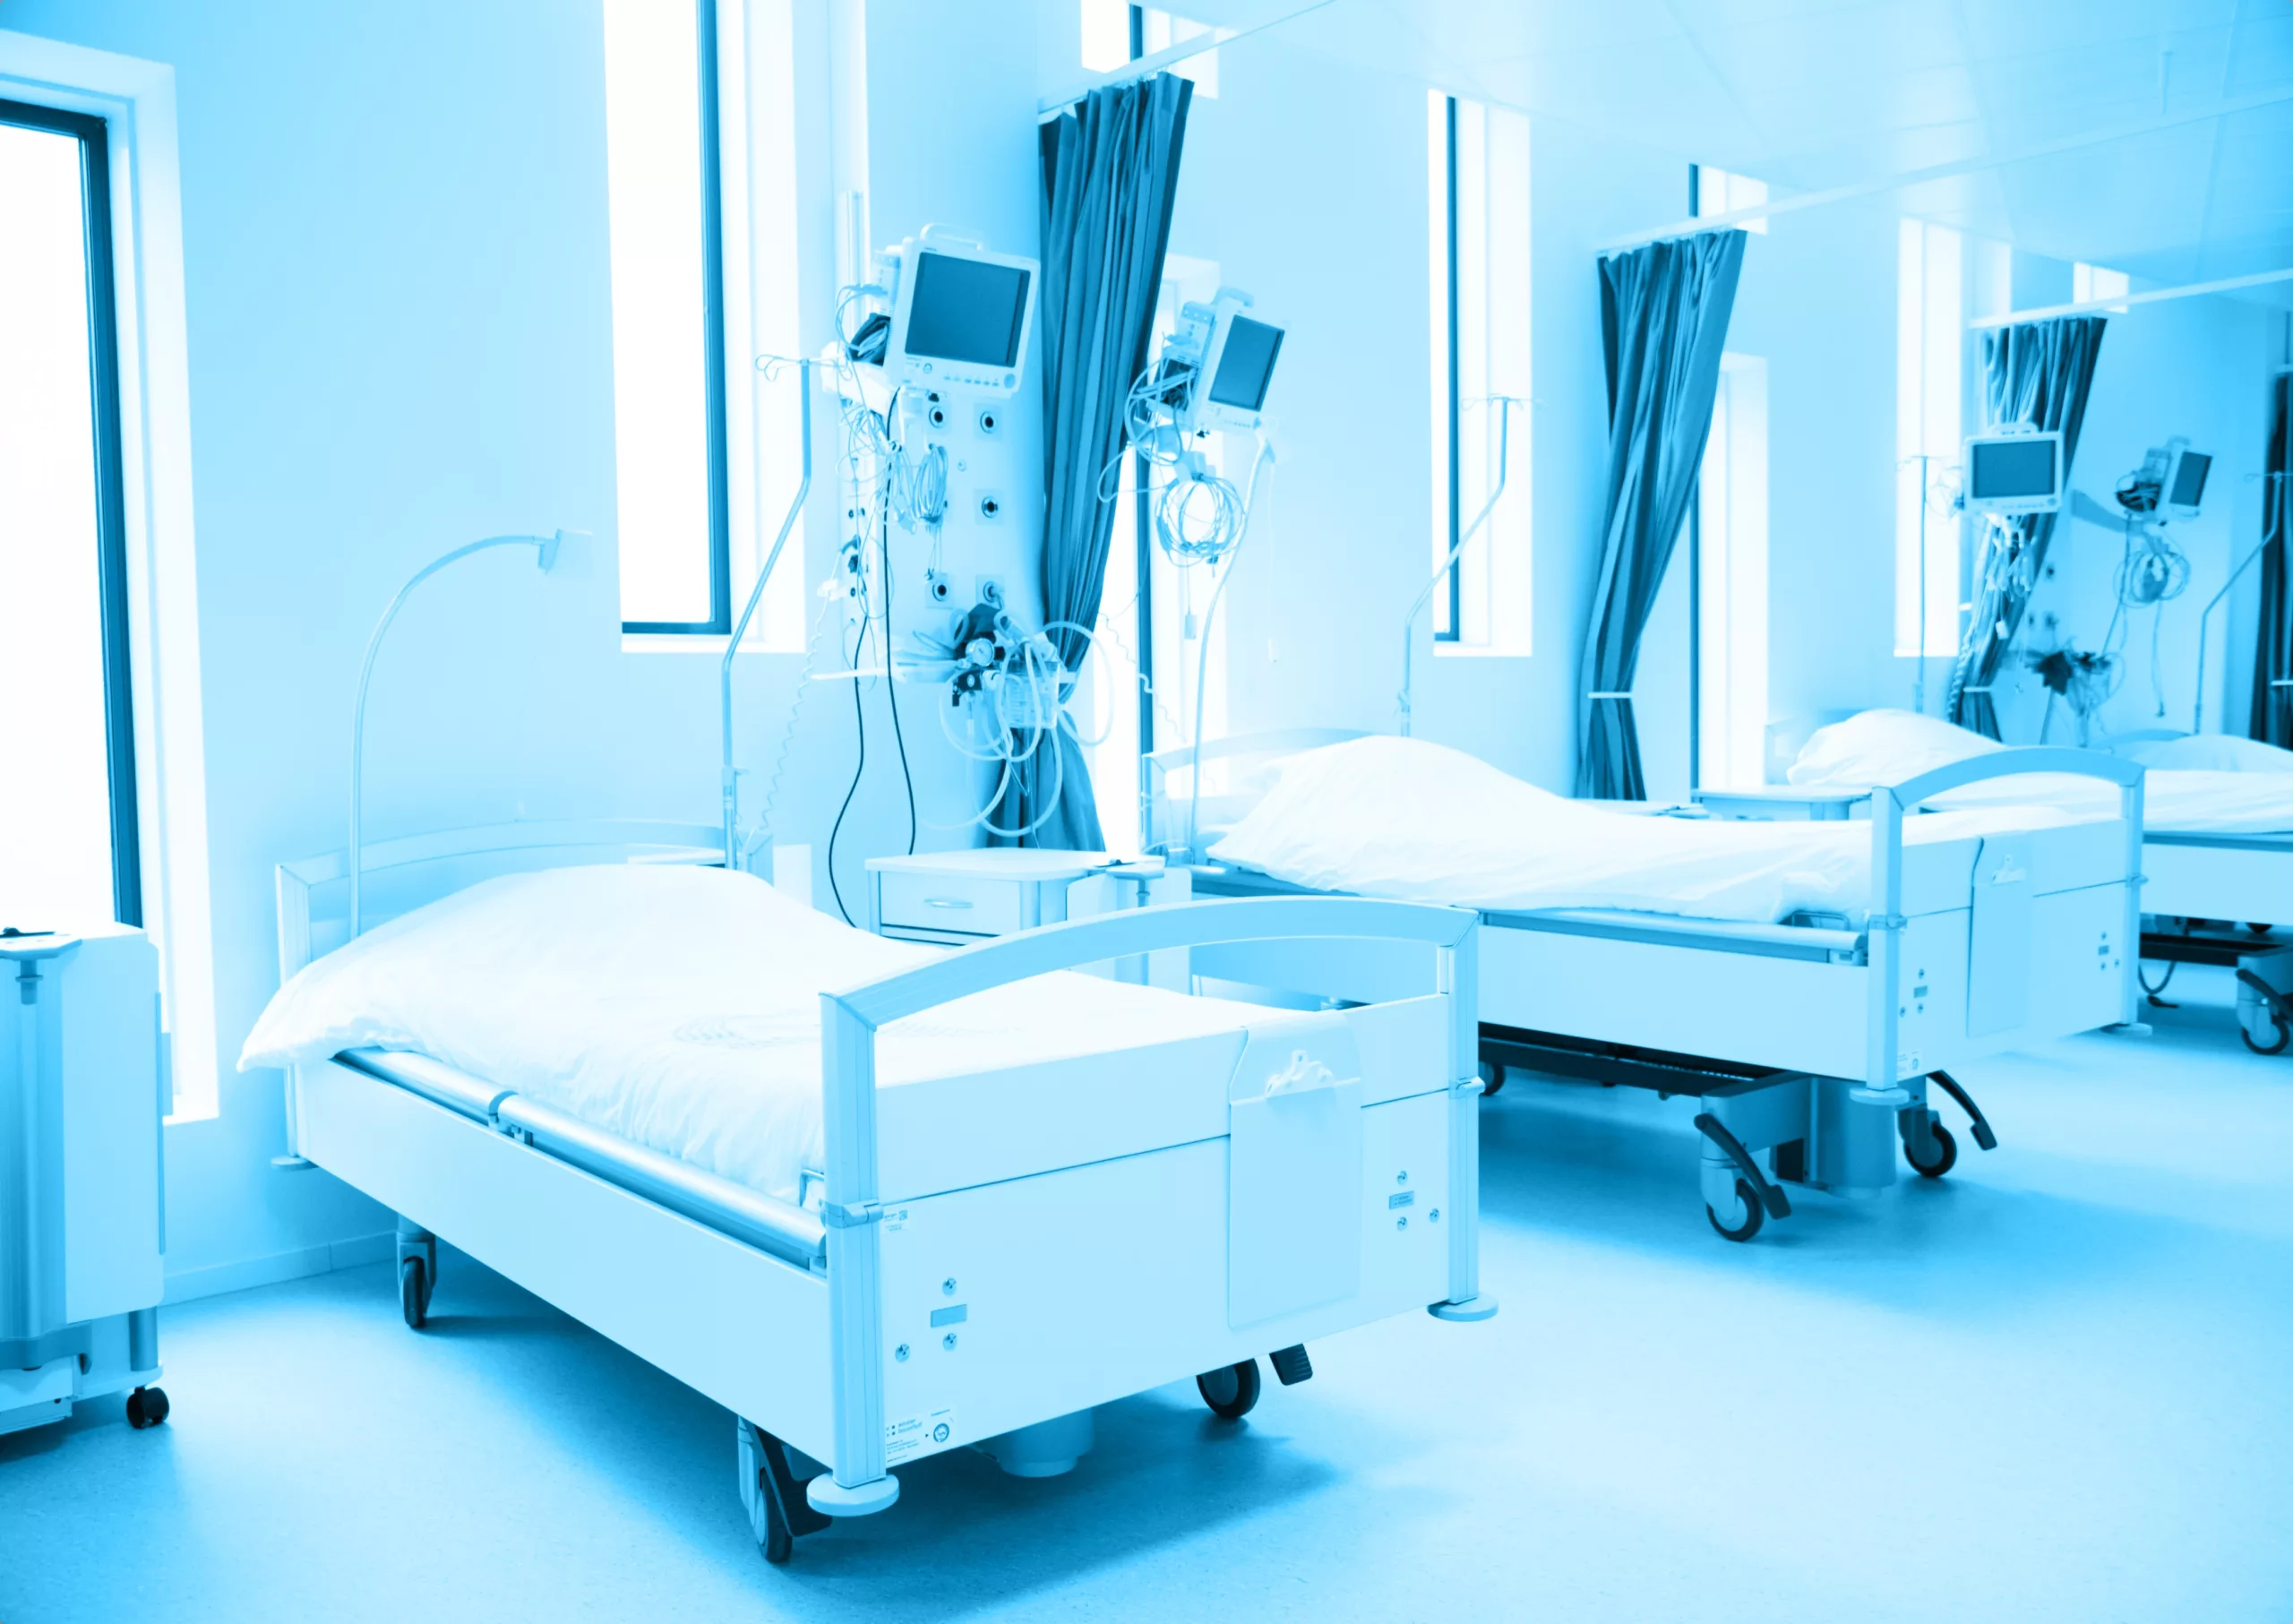 Asset Tracking for Hospitals and Healthcare Organizations